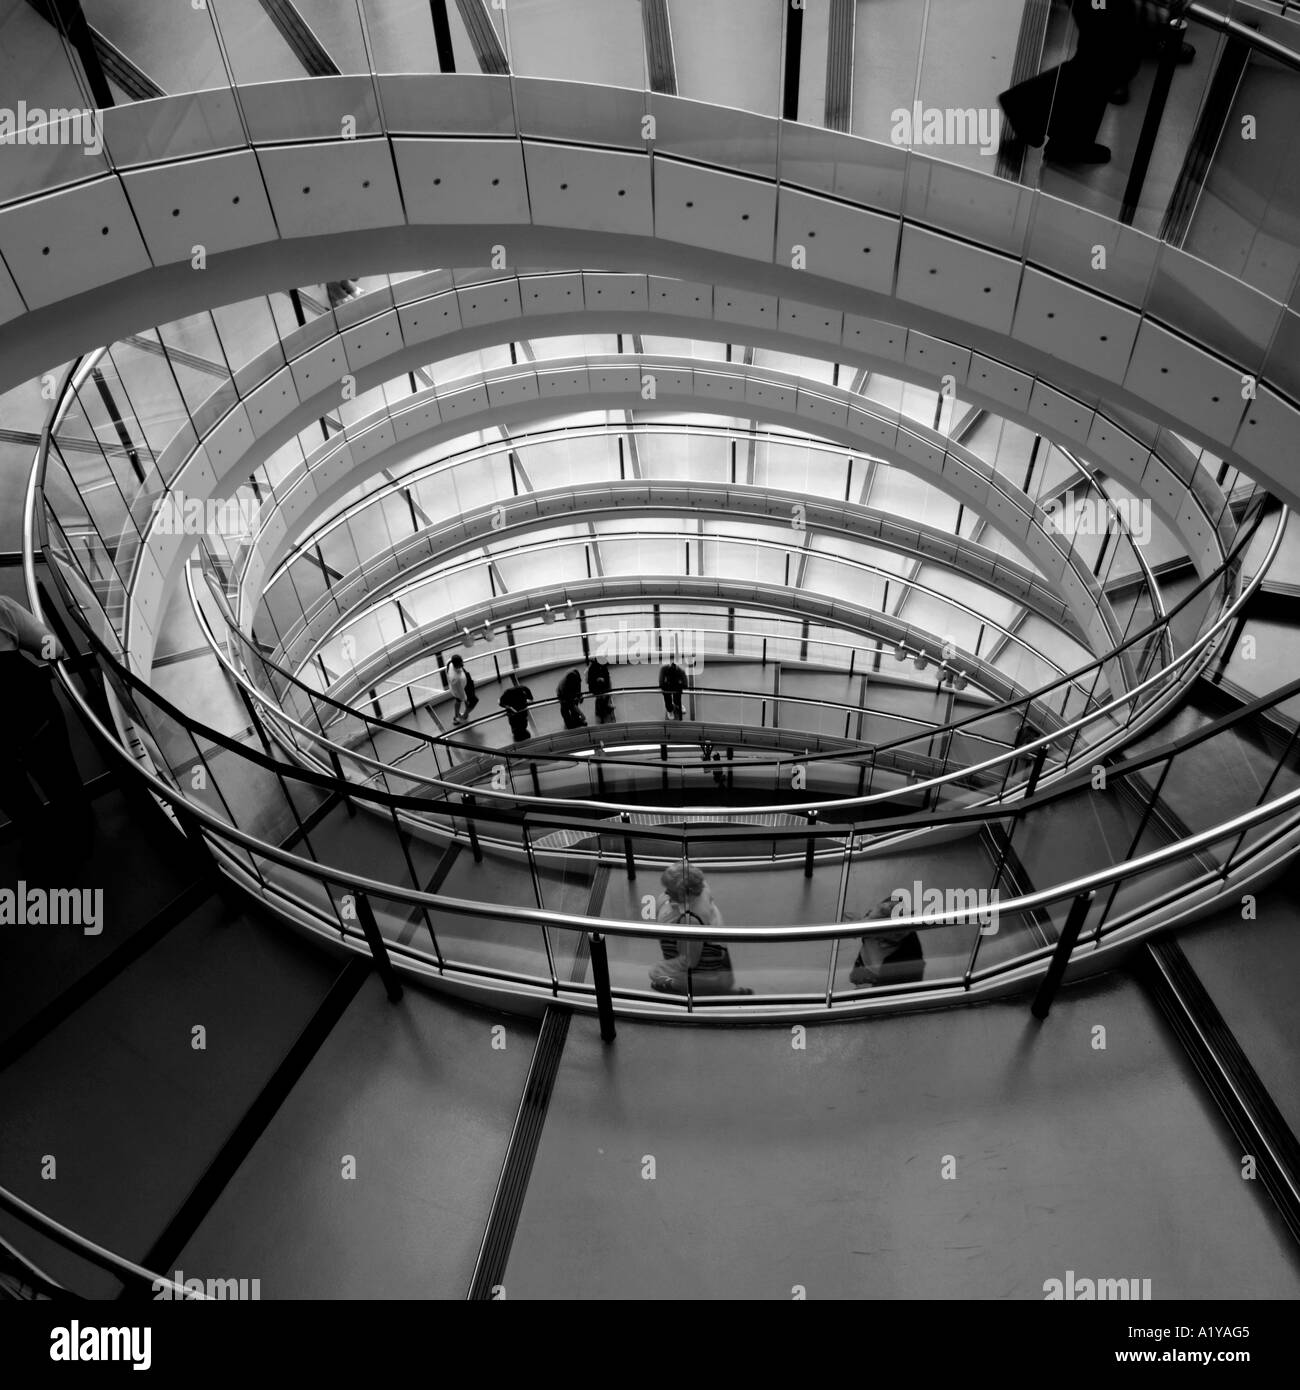 Spiral staircase, City Hall, London Stock Photo